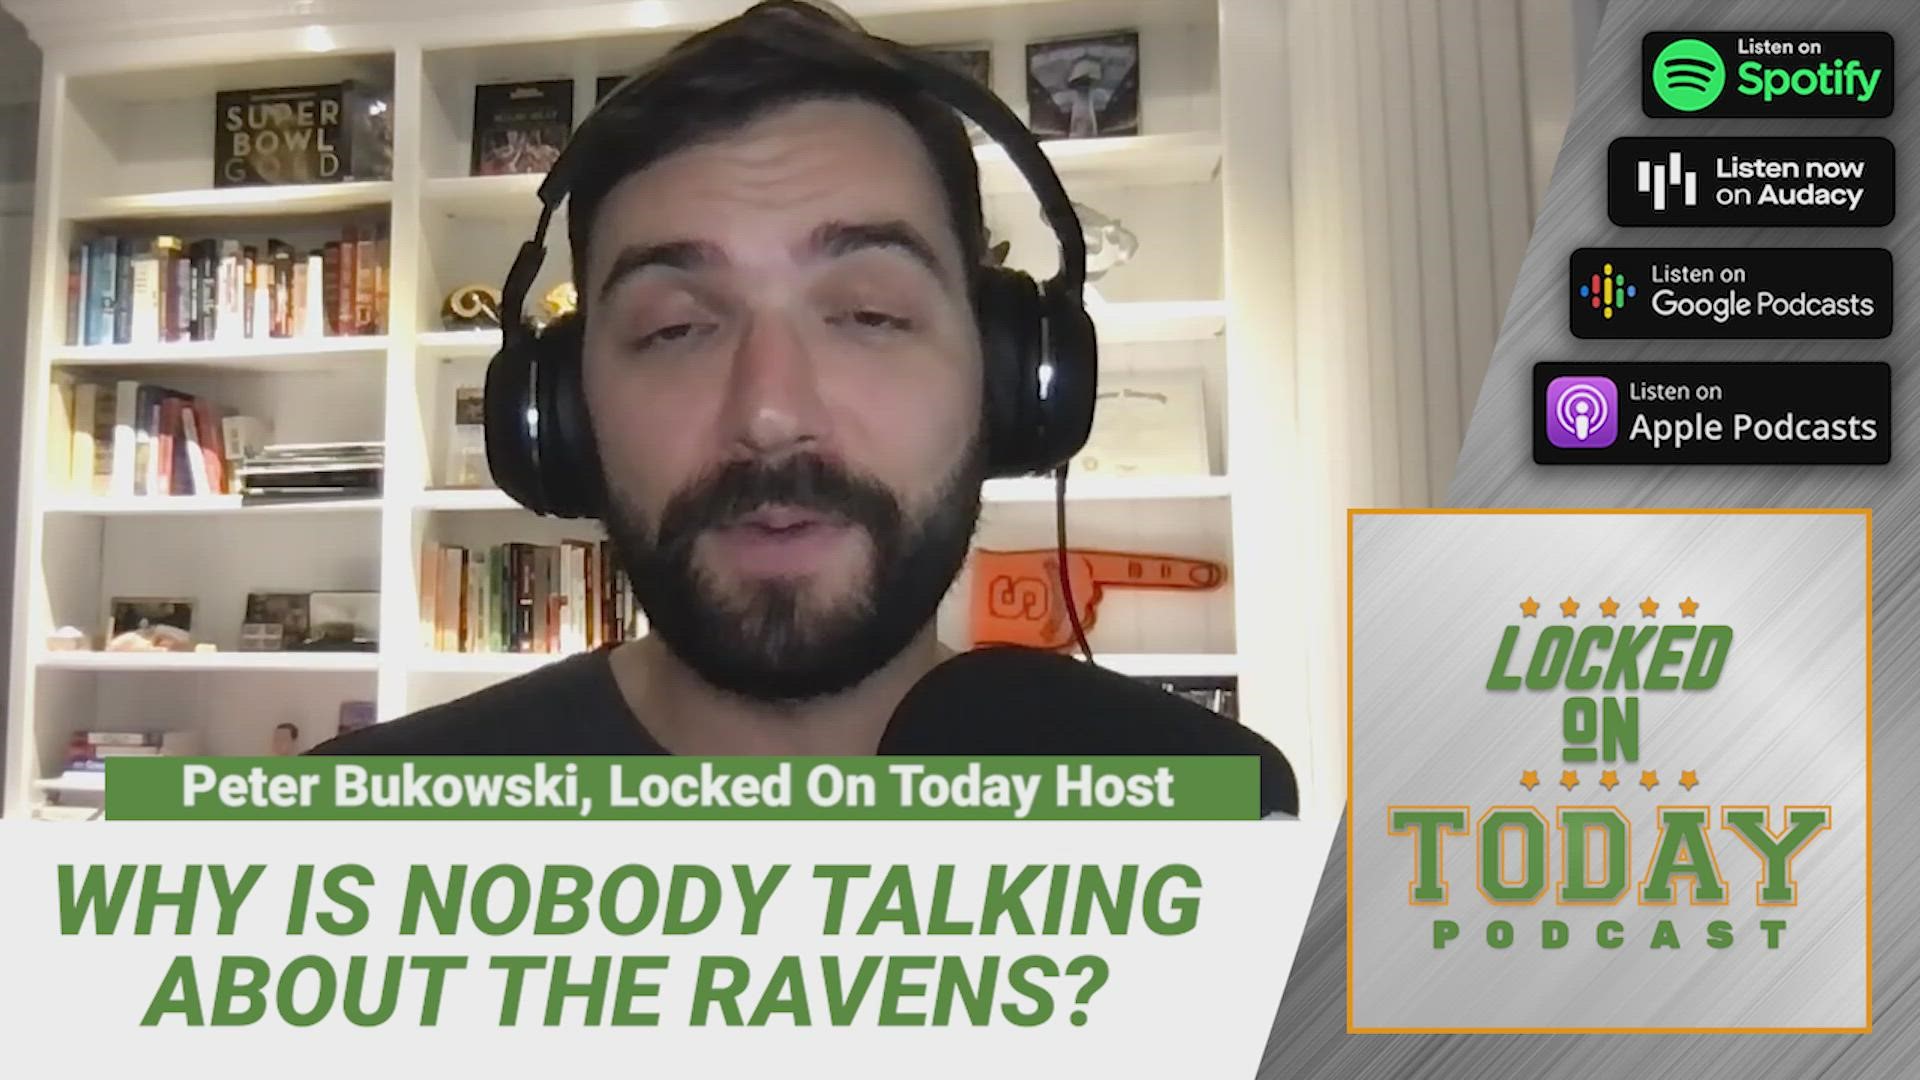 Are the Ravens legitimate Super Bowl contenders? They should be, but they're not being talked about as much as others at the top.